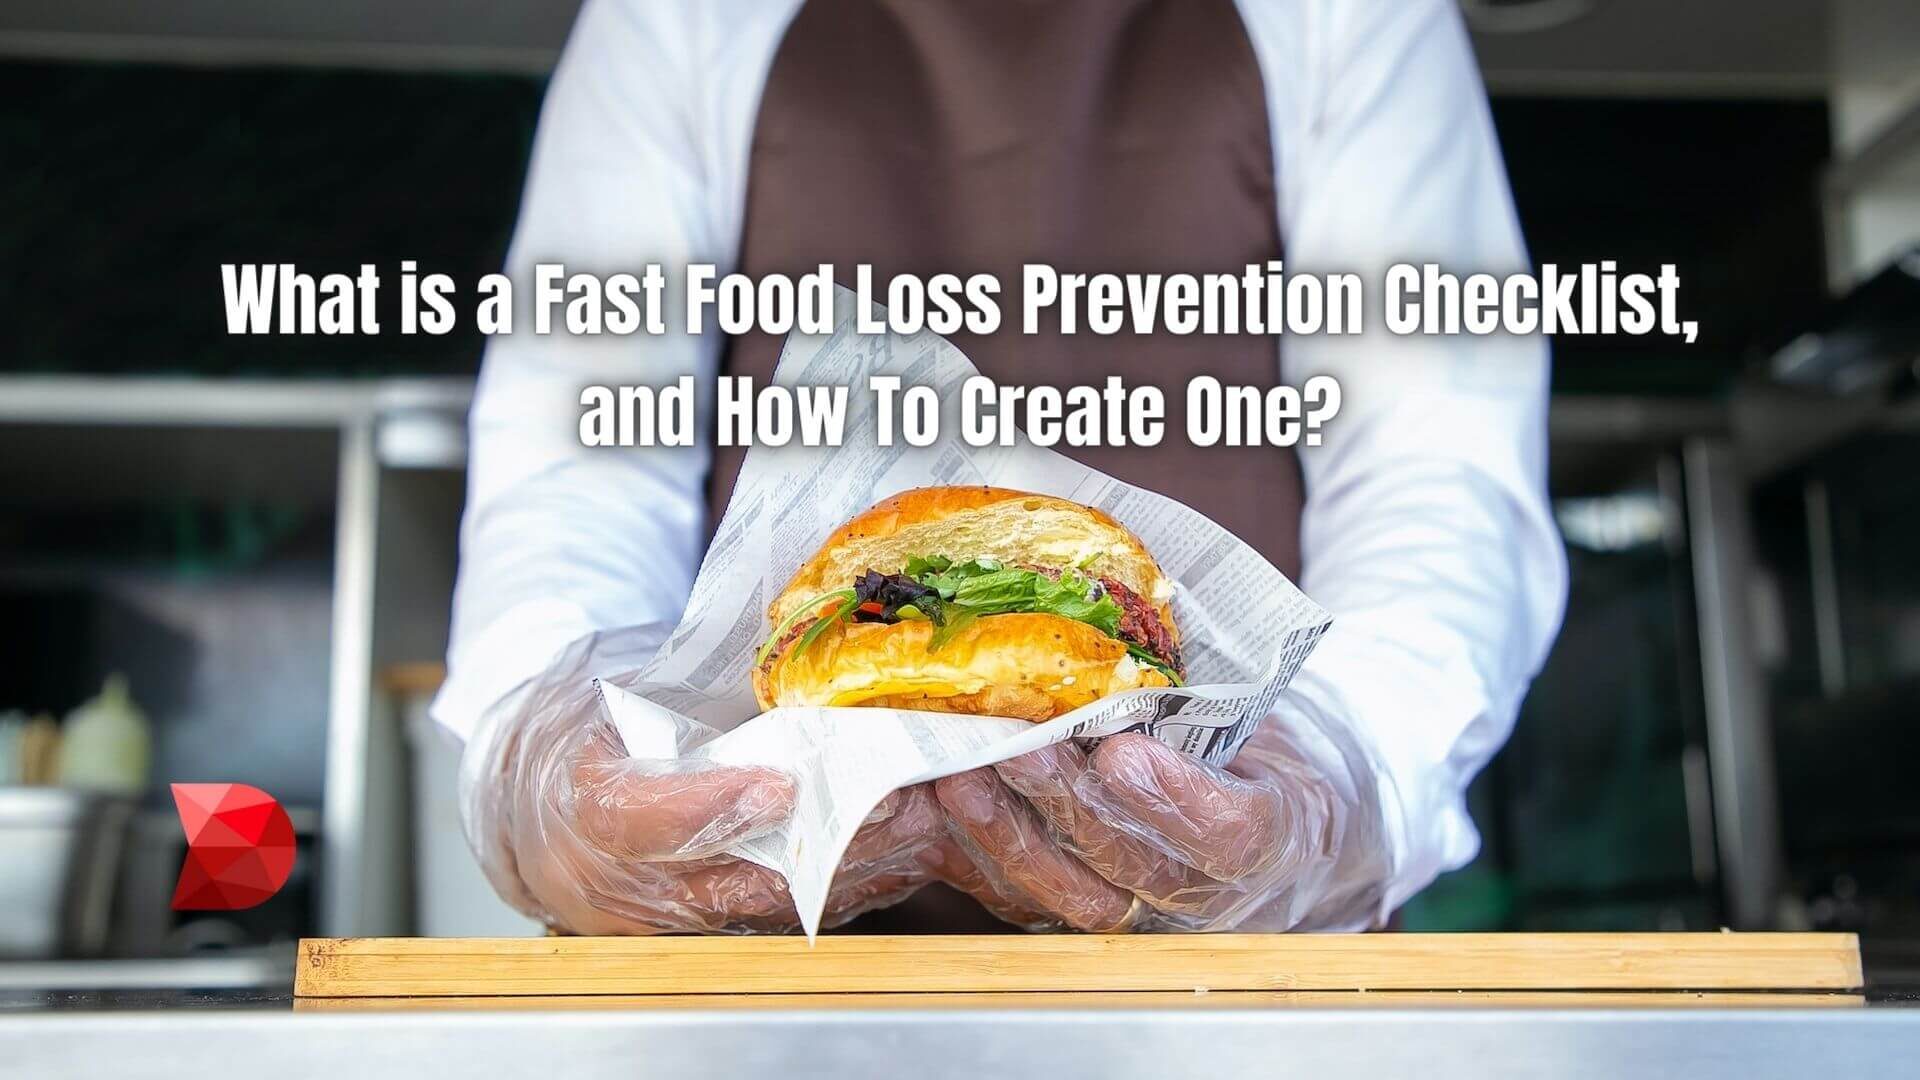 What is a Fast Food Loss Prevention Checklist? - DataMyte